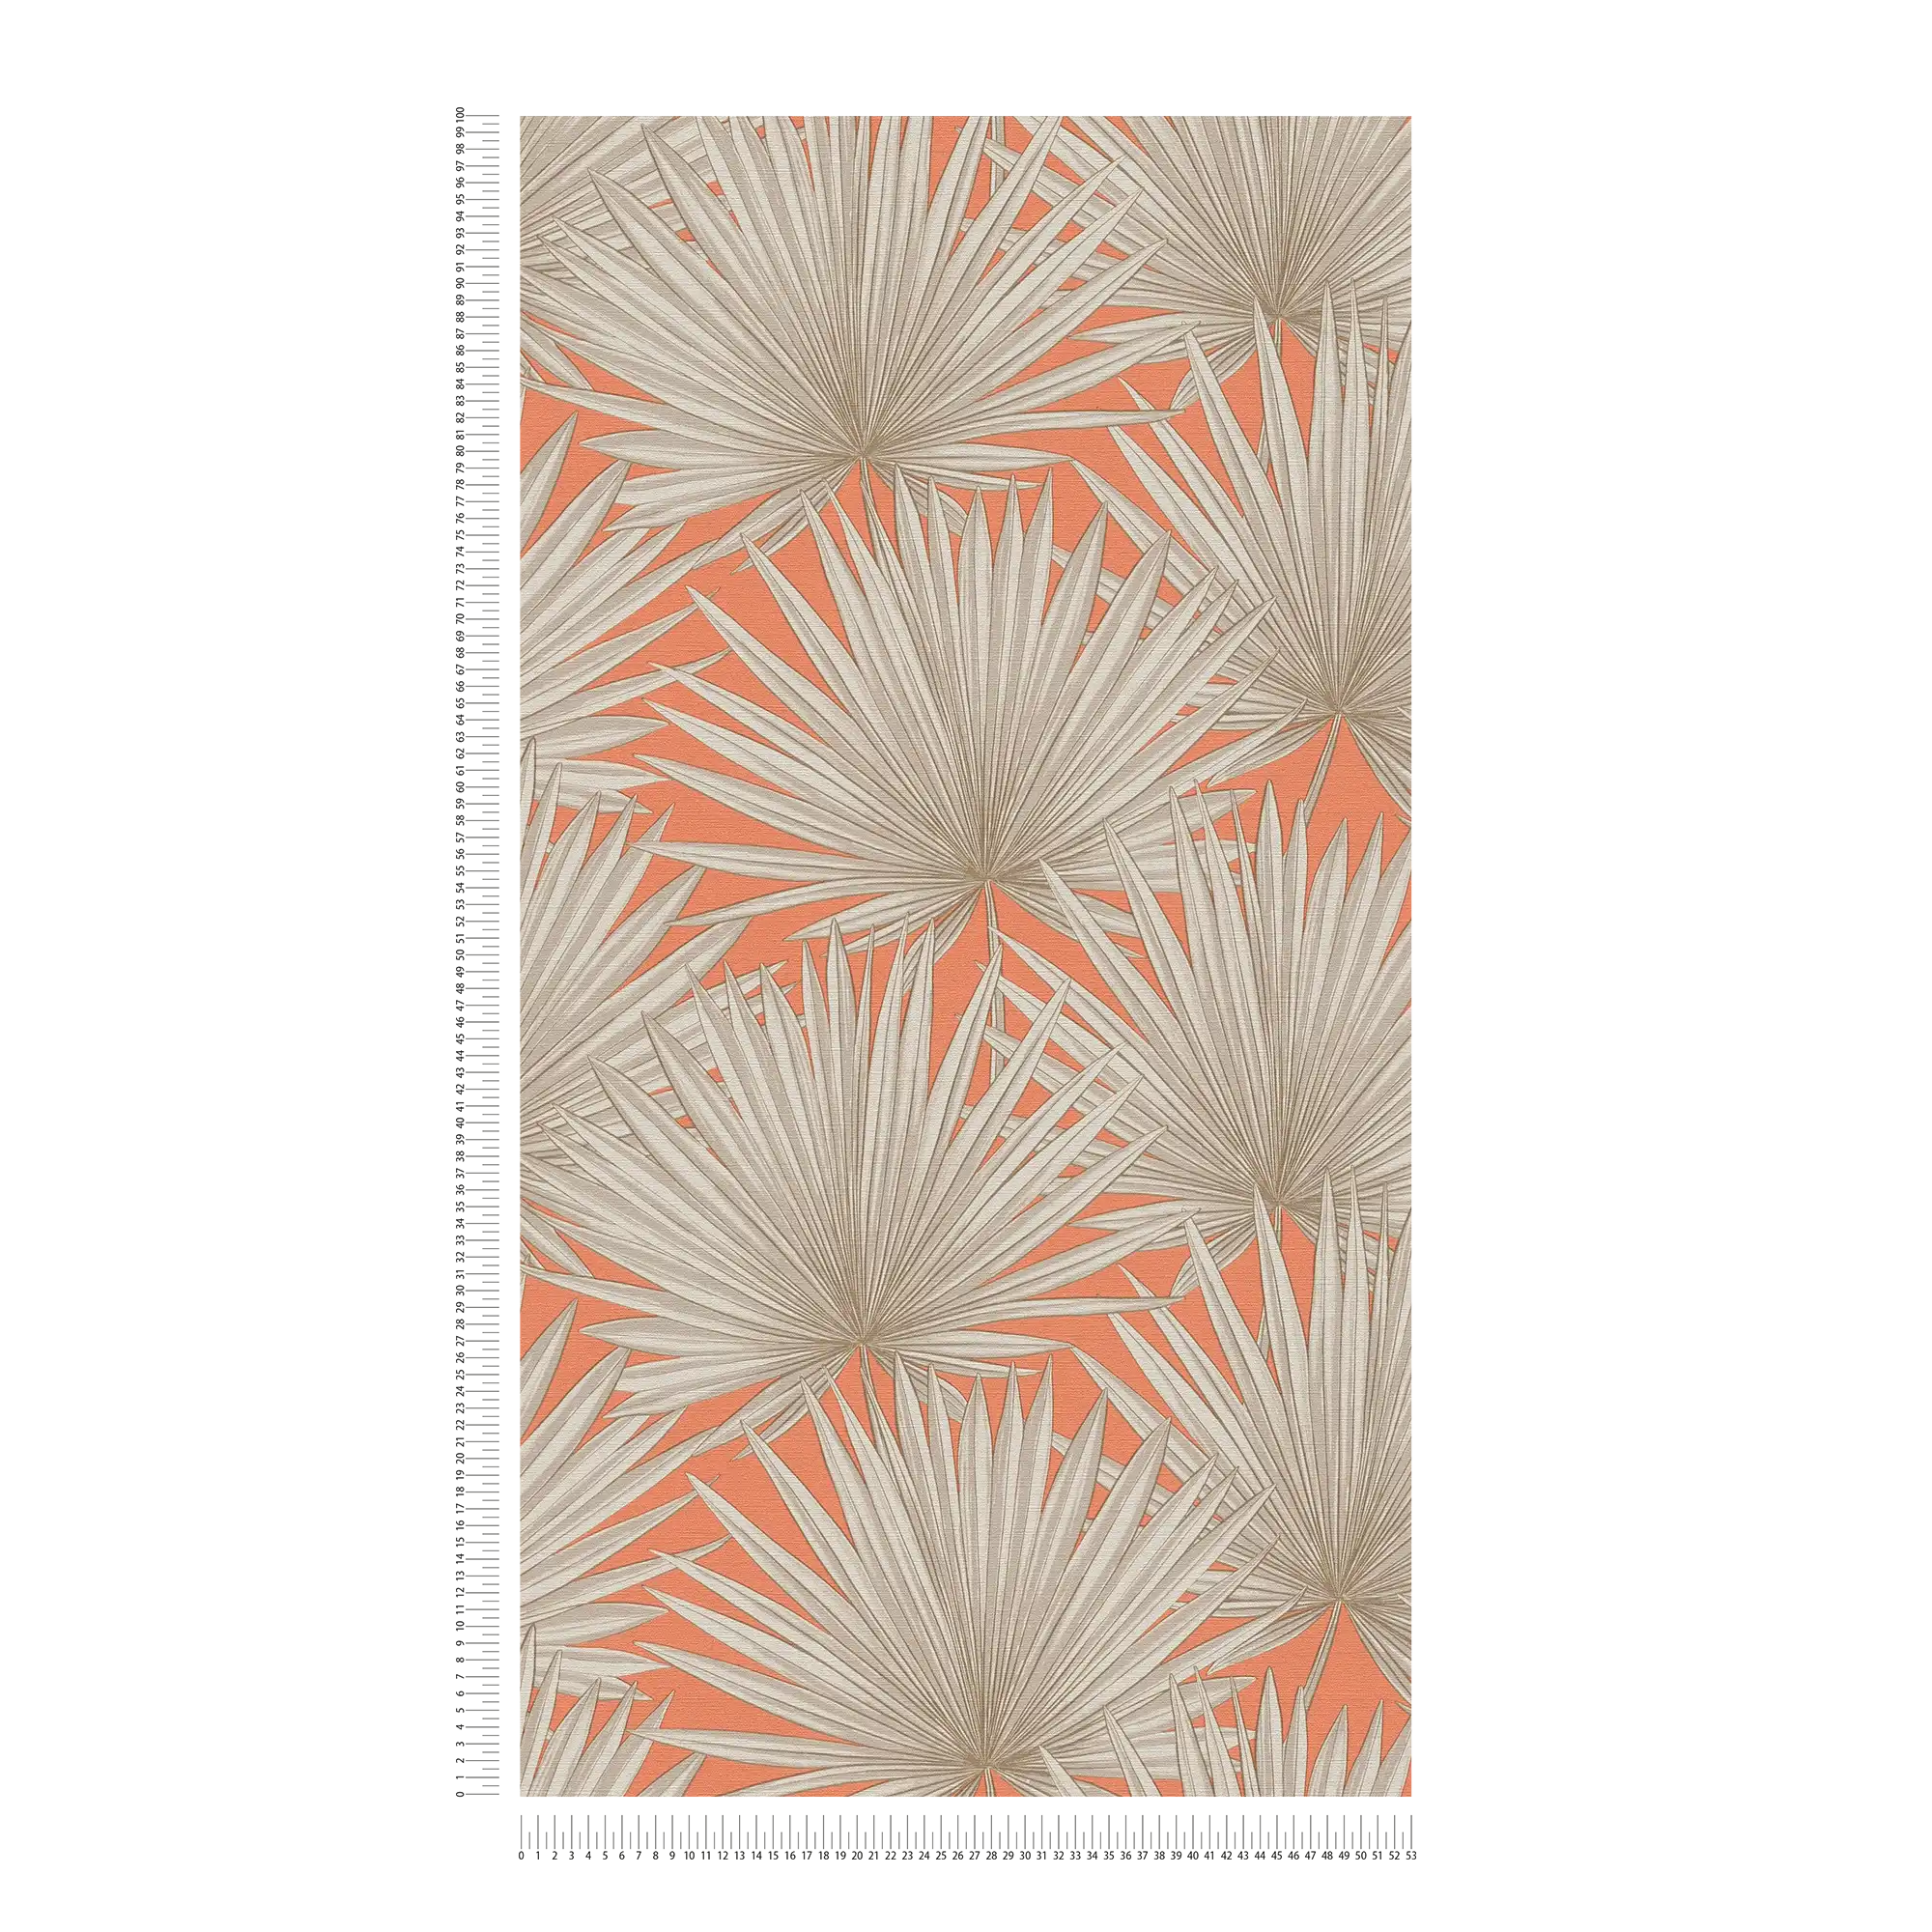             Non-woven wallpaper with tropical leaves - orange, greige, white
        